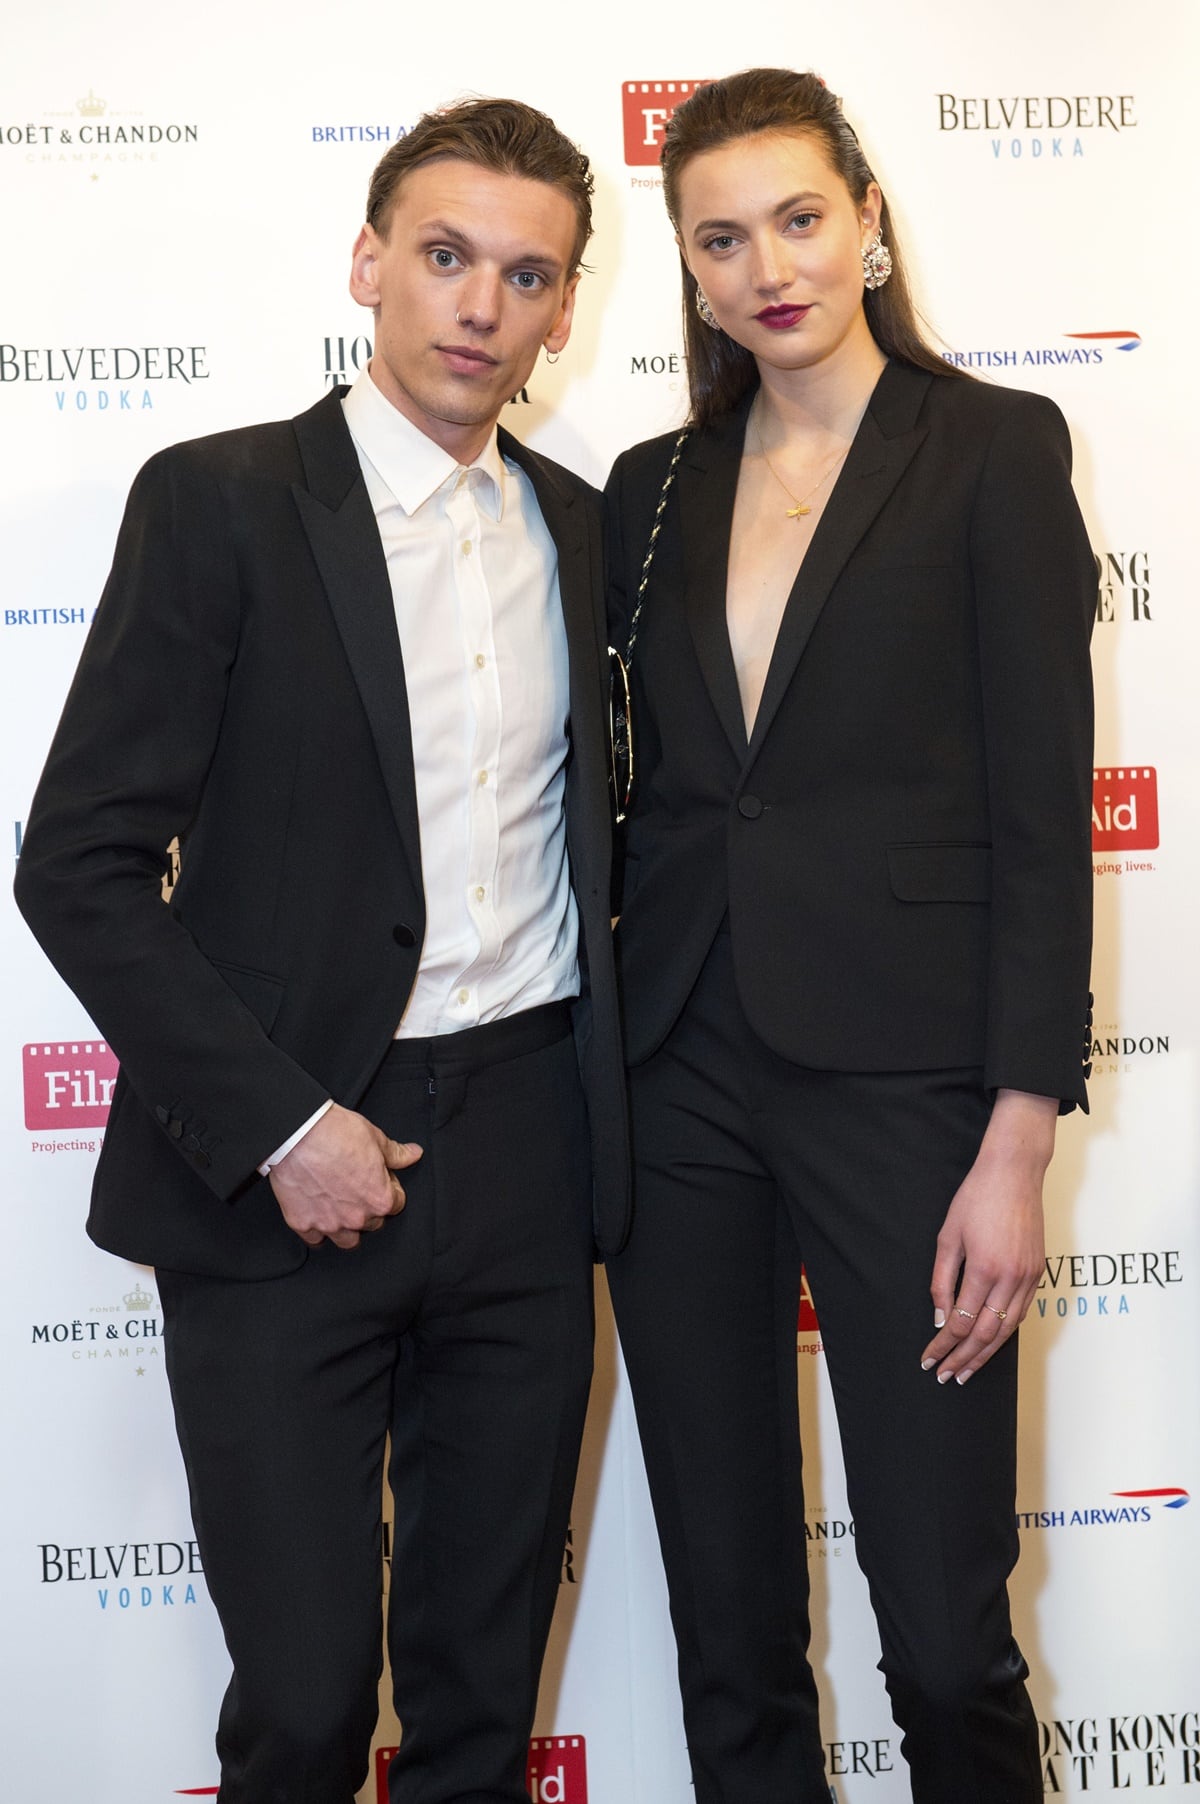 Jamie Campbell Bower looked short next to his girlfriend Matilda Lowther, whom he dated from March 2014 to November 2017